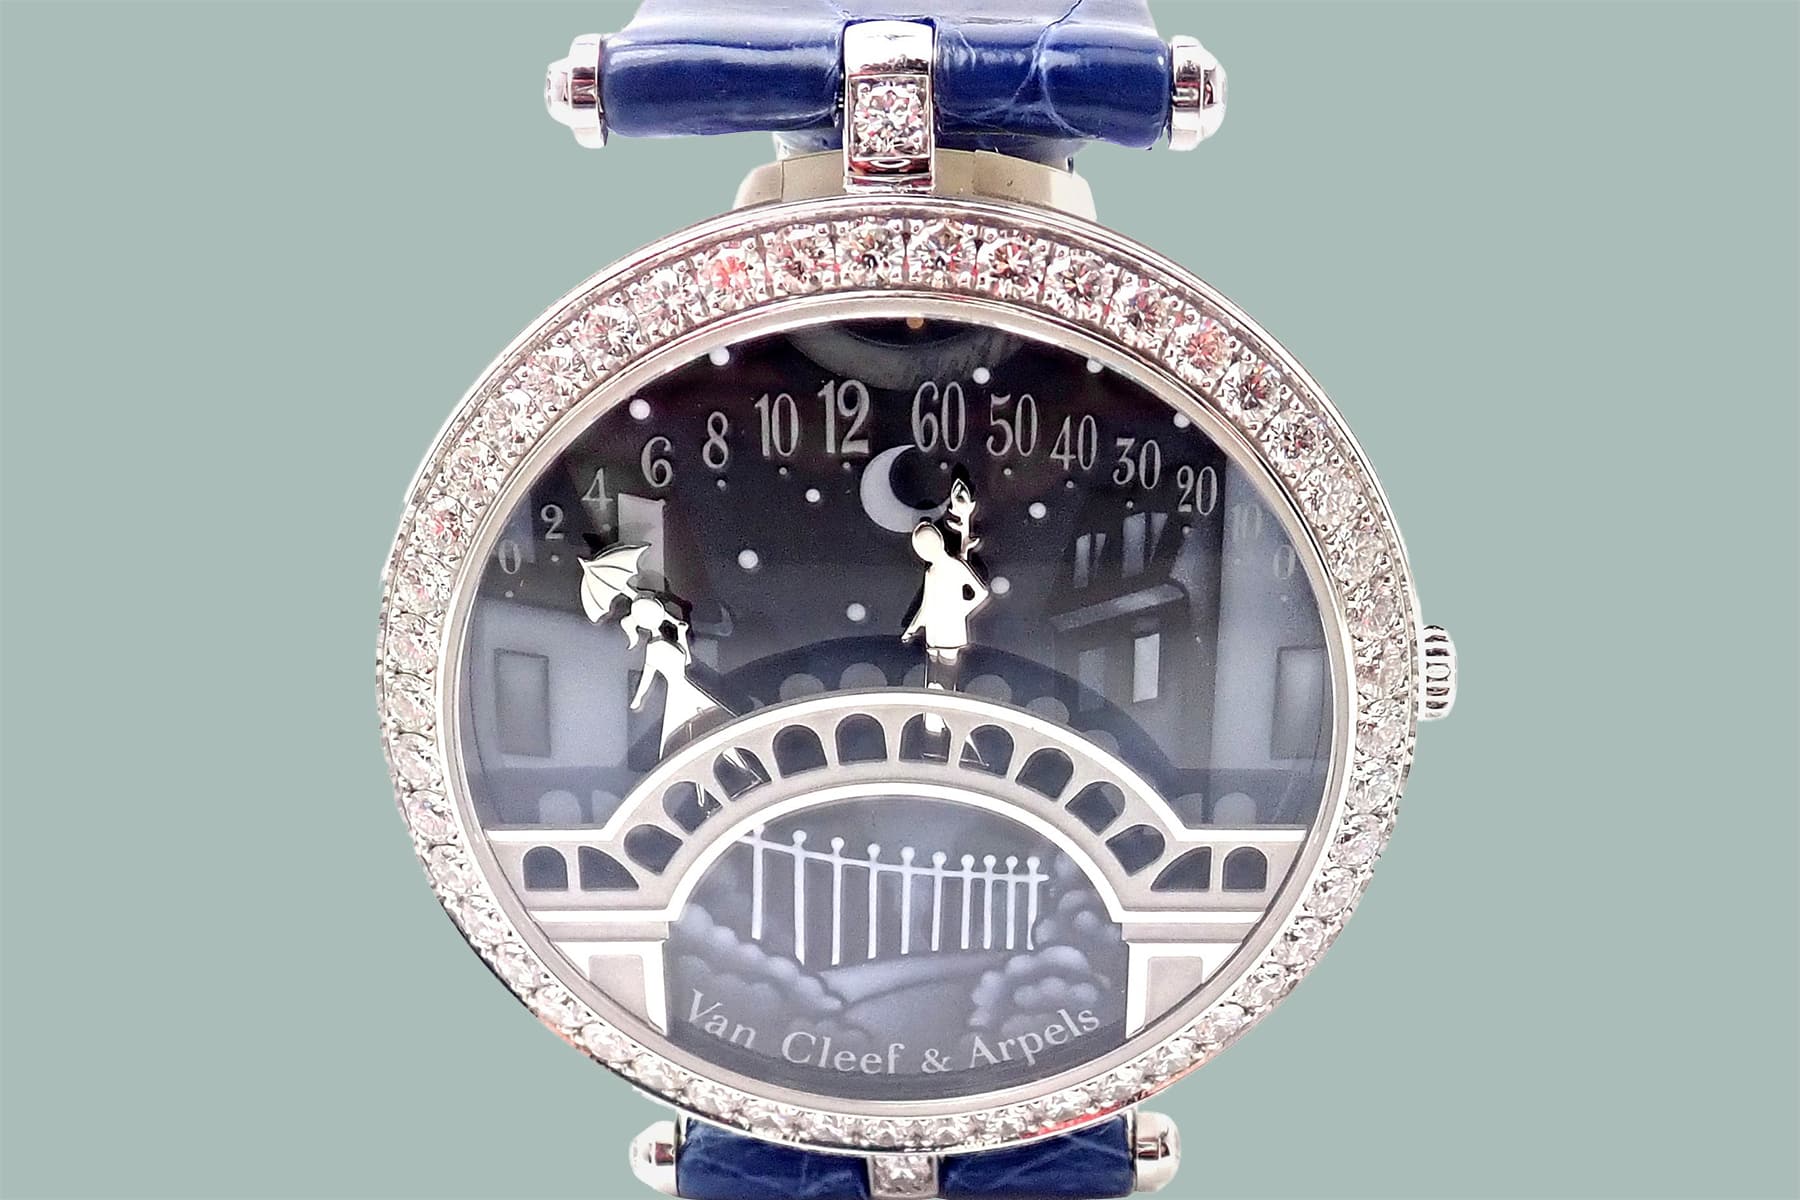 featured image for post: A Mini Romance Plays Out on the Dial of This Van Cleef and Arpels Watch